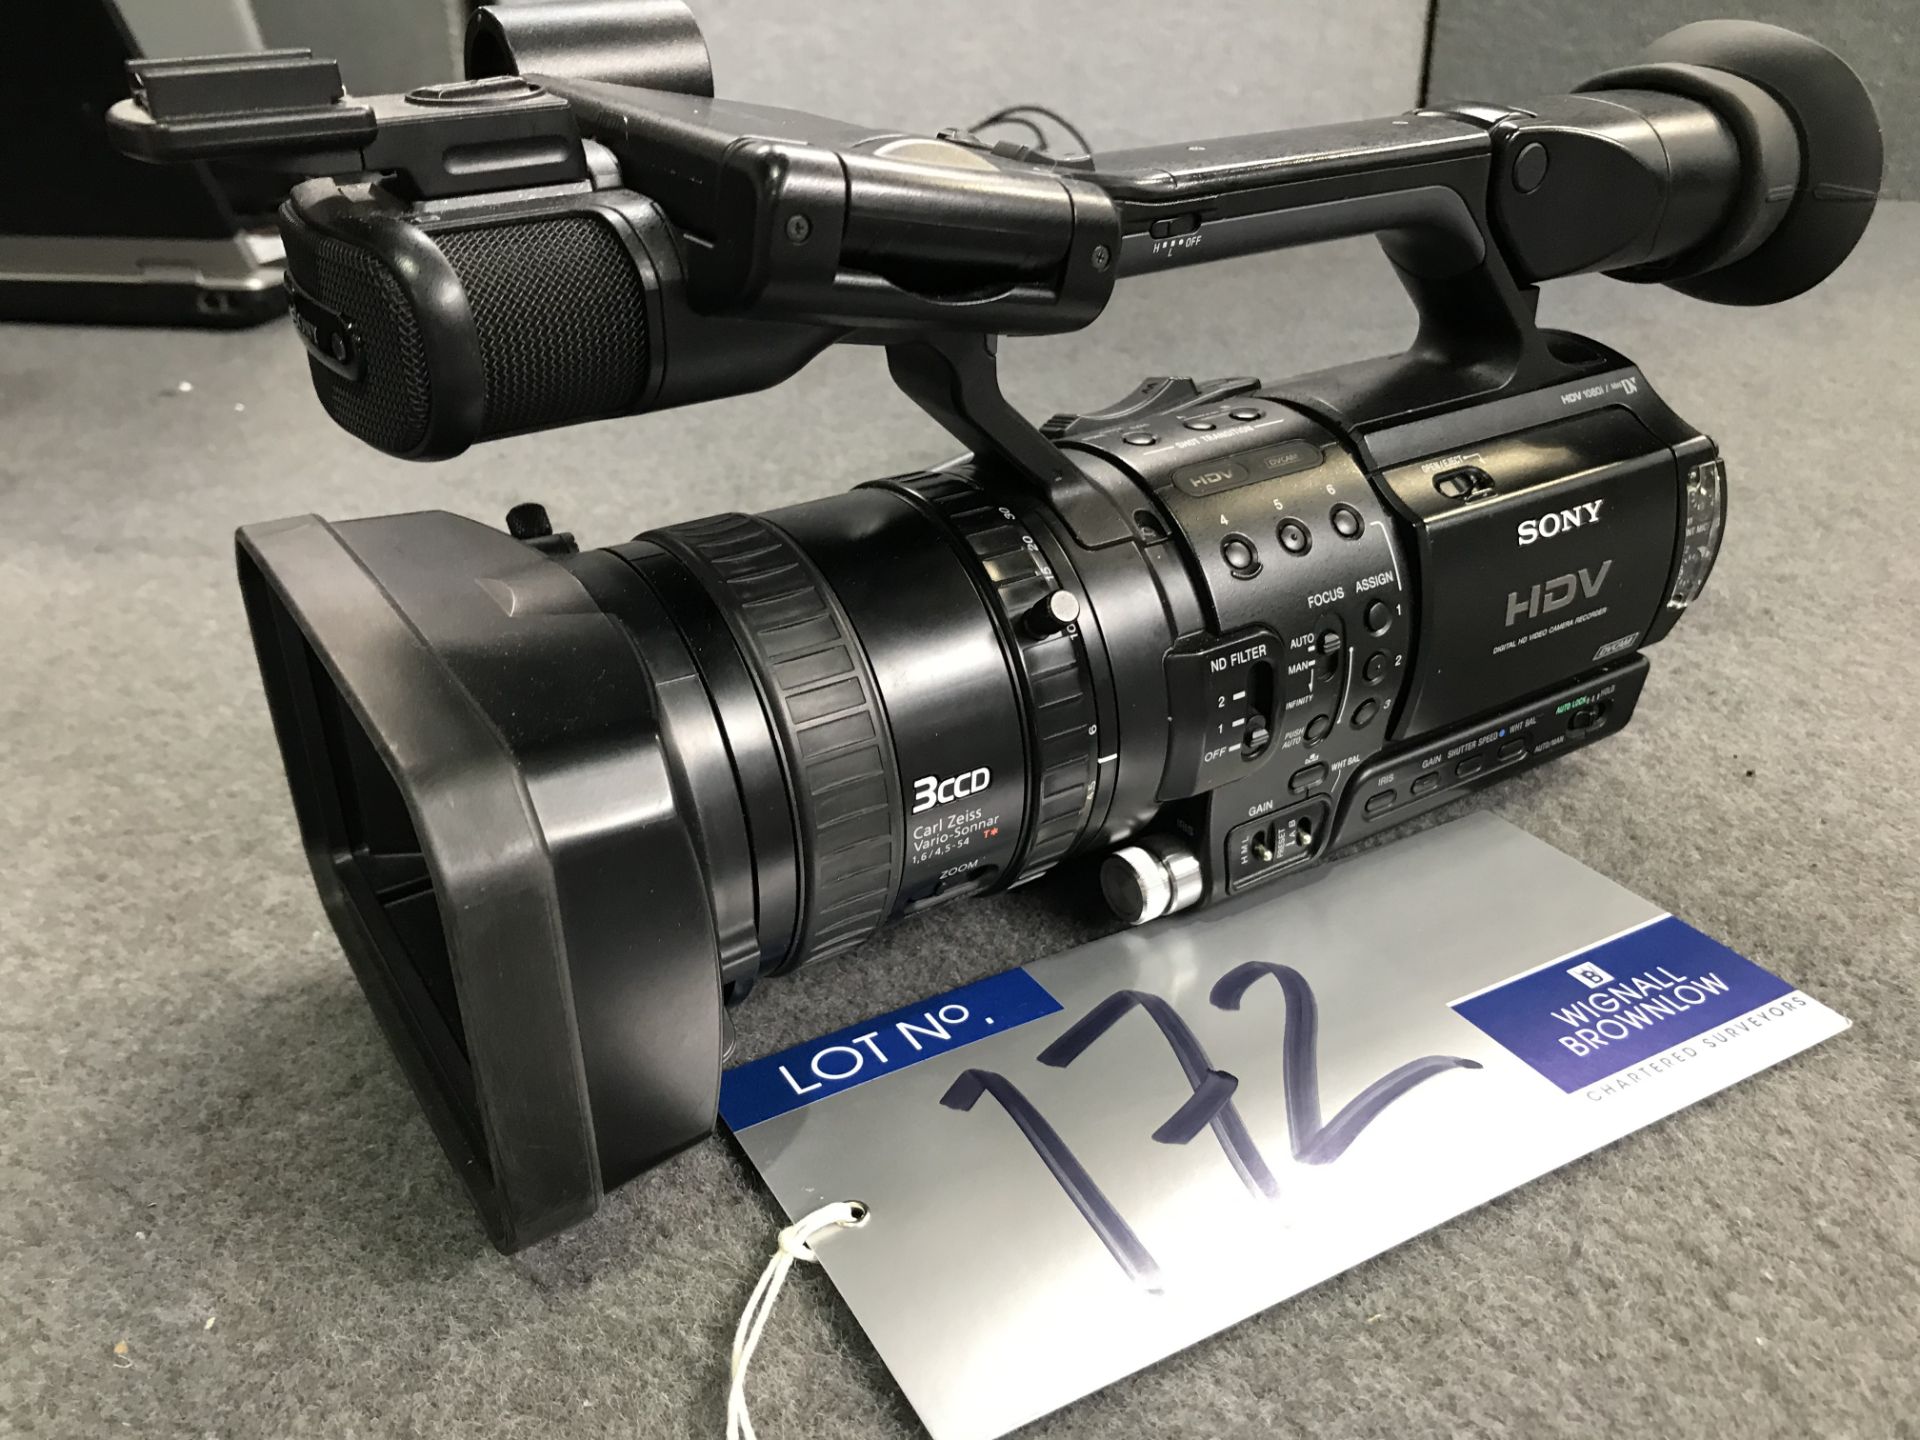 A Sony HVR-Z1U Digital HD Video Camera Recorder No.1129938 with carry case and accessories (